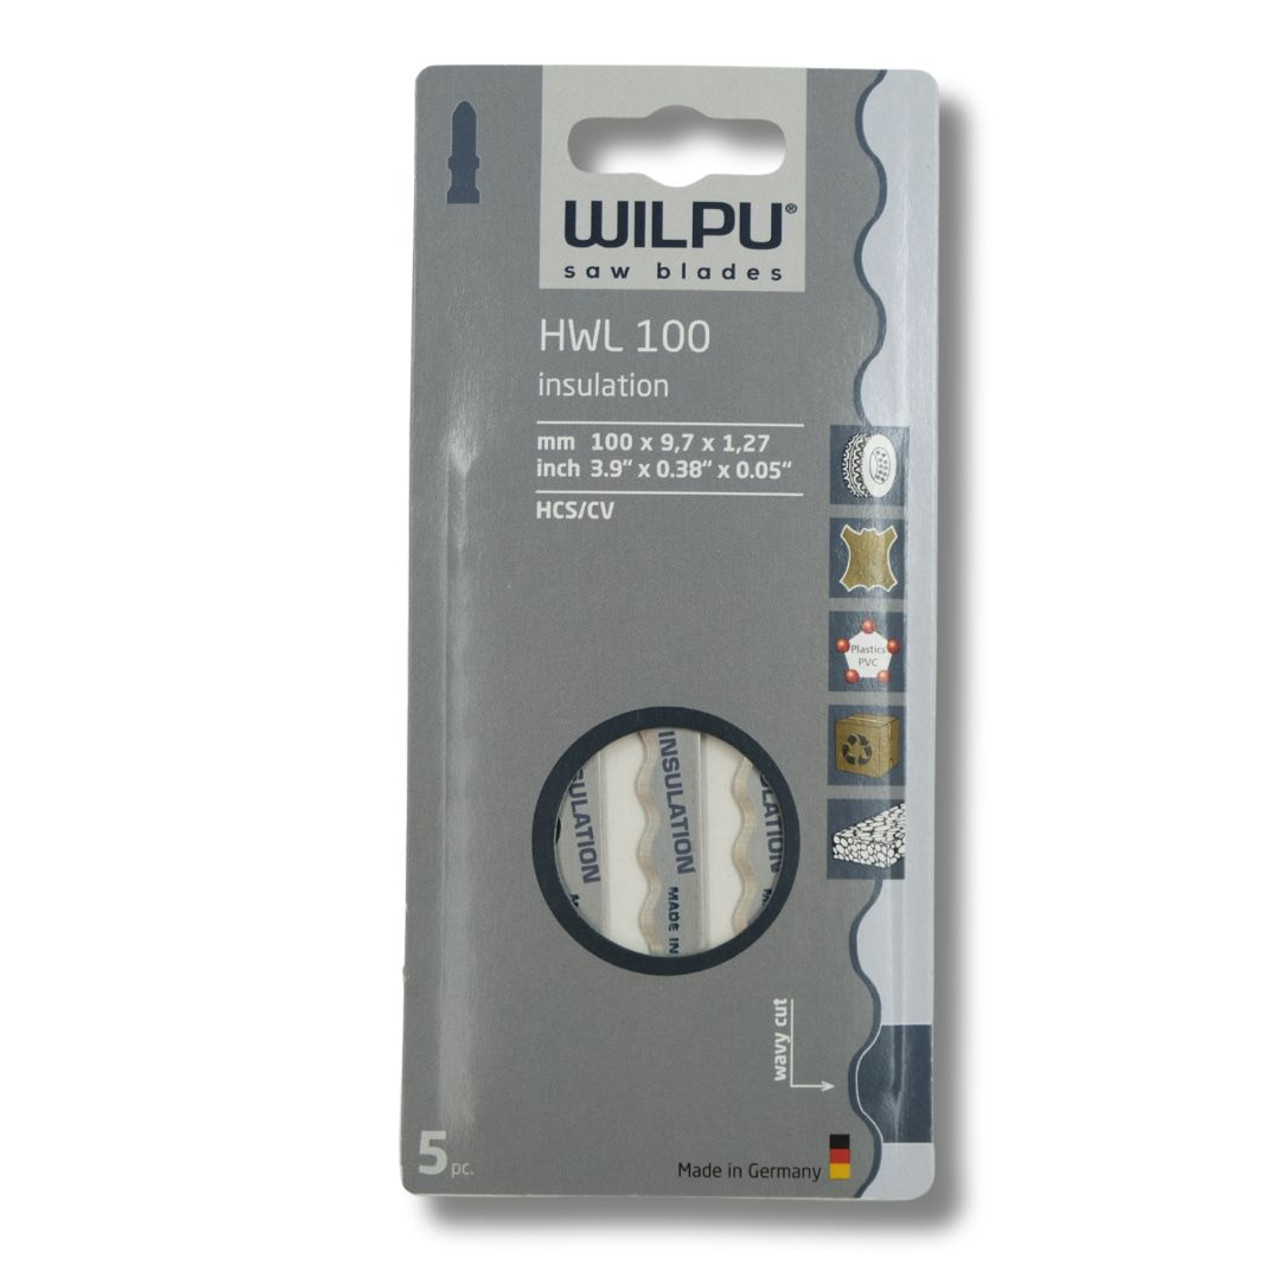 WILPU Jigsaw Blade for Woodworkers, the HWL 100 Saw Blade is for Wave for Insulation